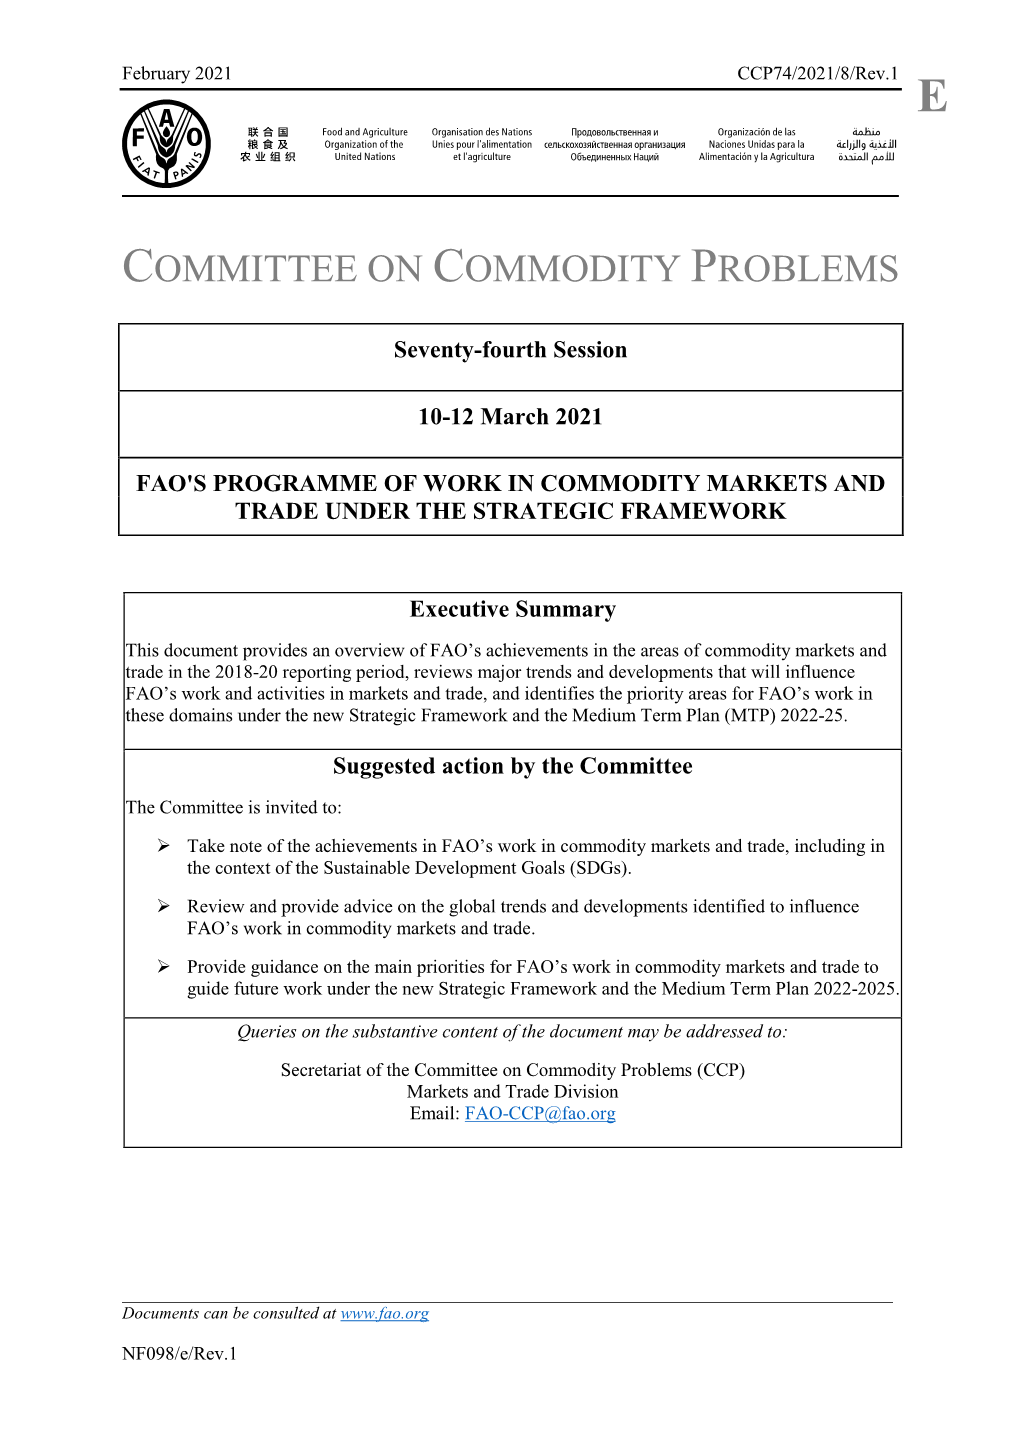 Committee on Commodity Problems